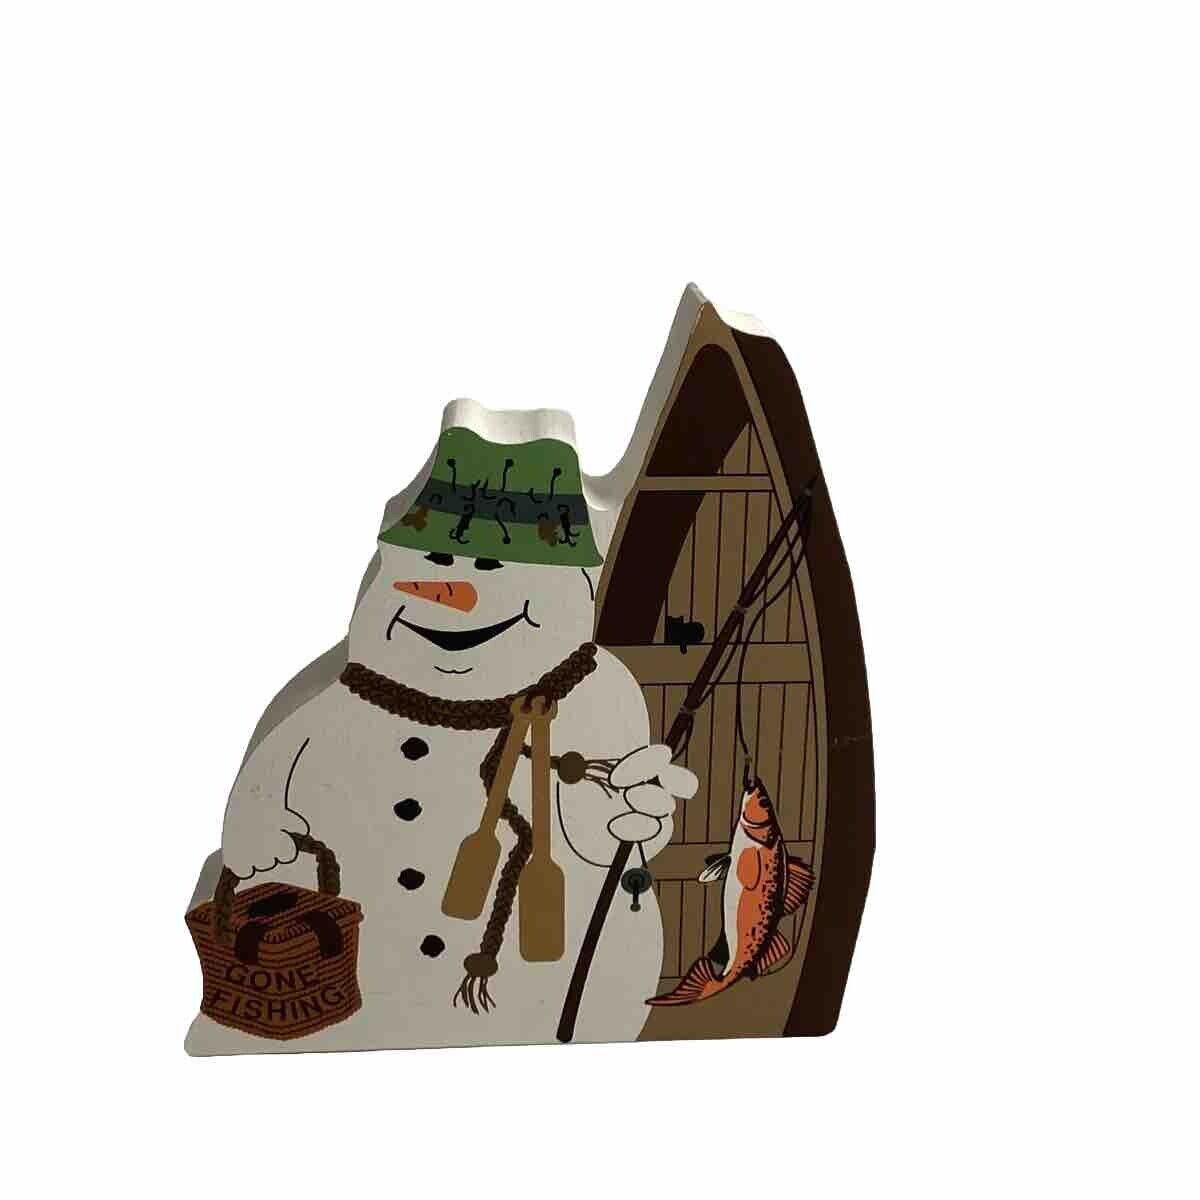 Gone Fishing Wooden Snowman The Cats Meow 1999